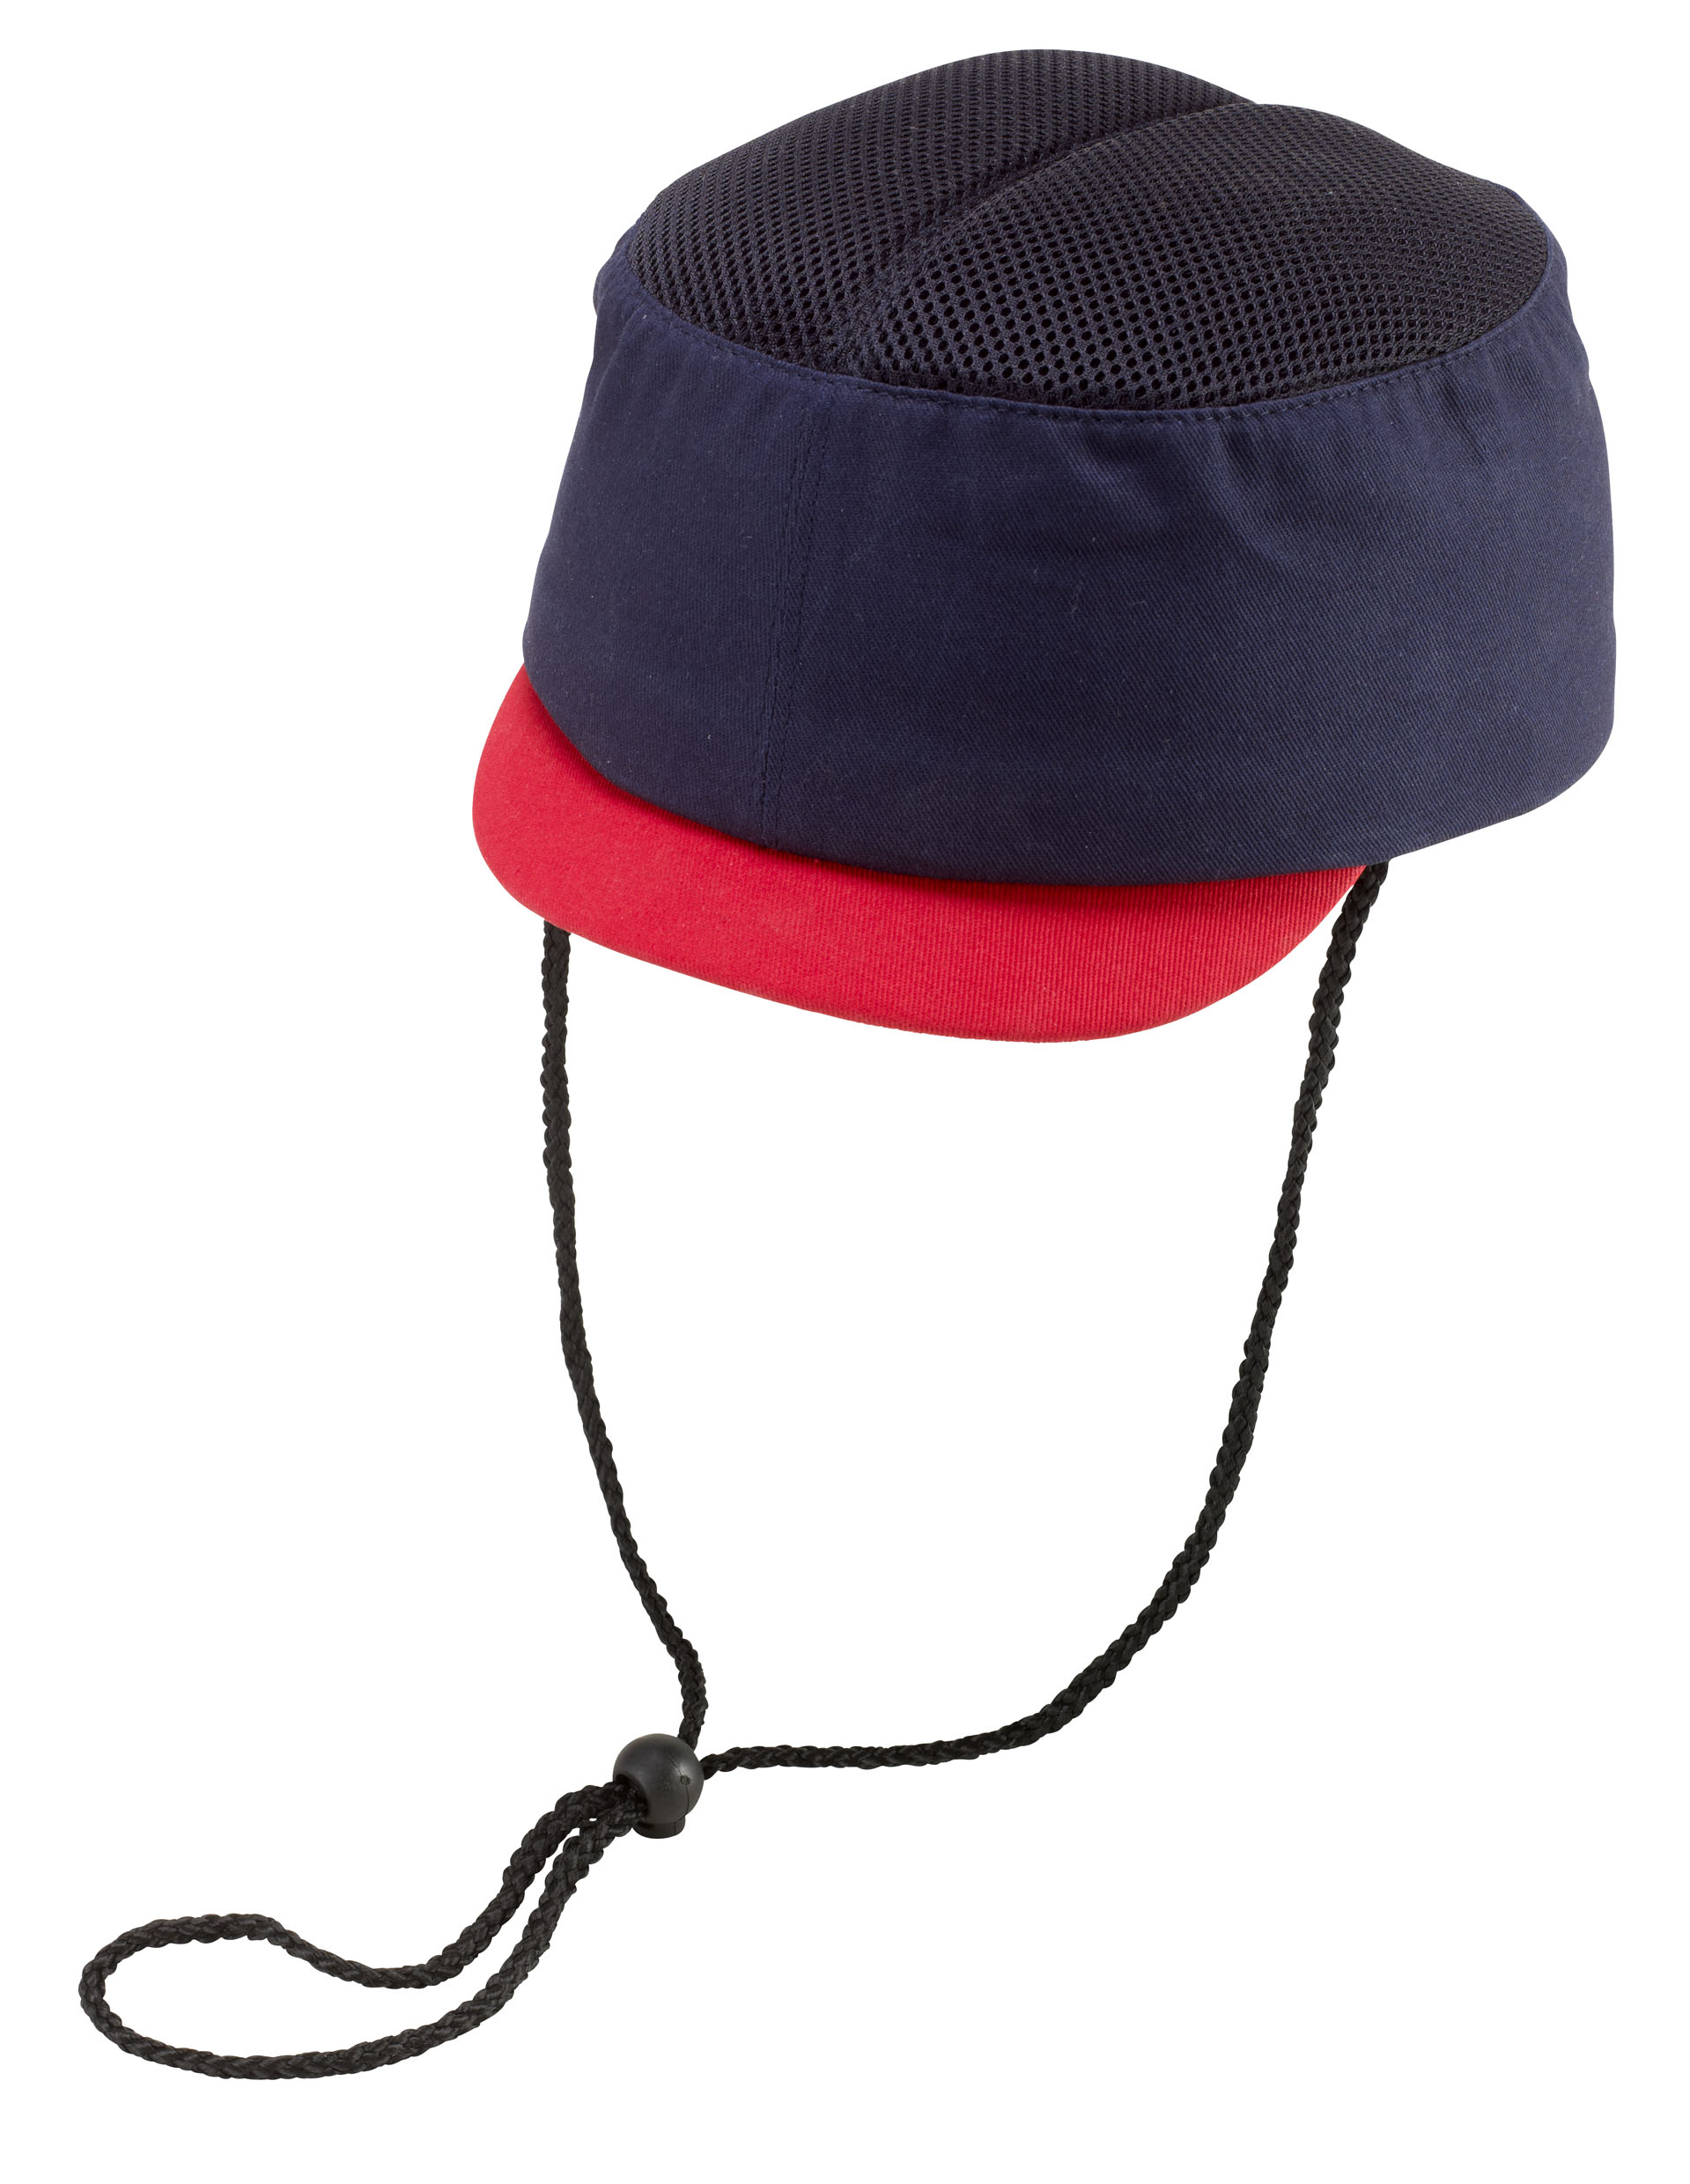 yachting cap meaning